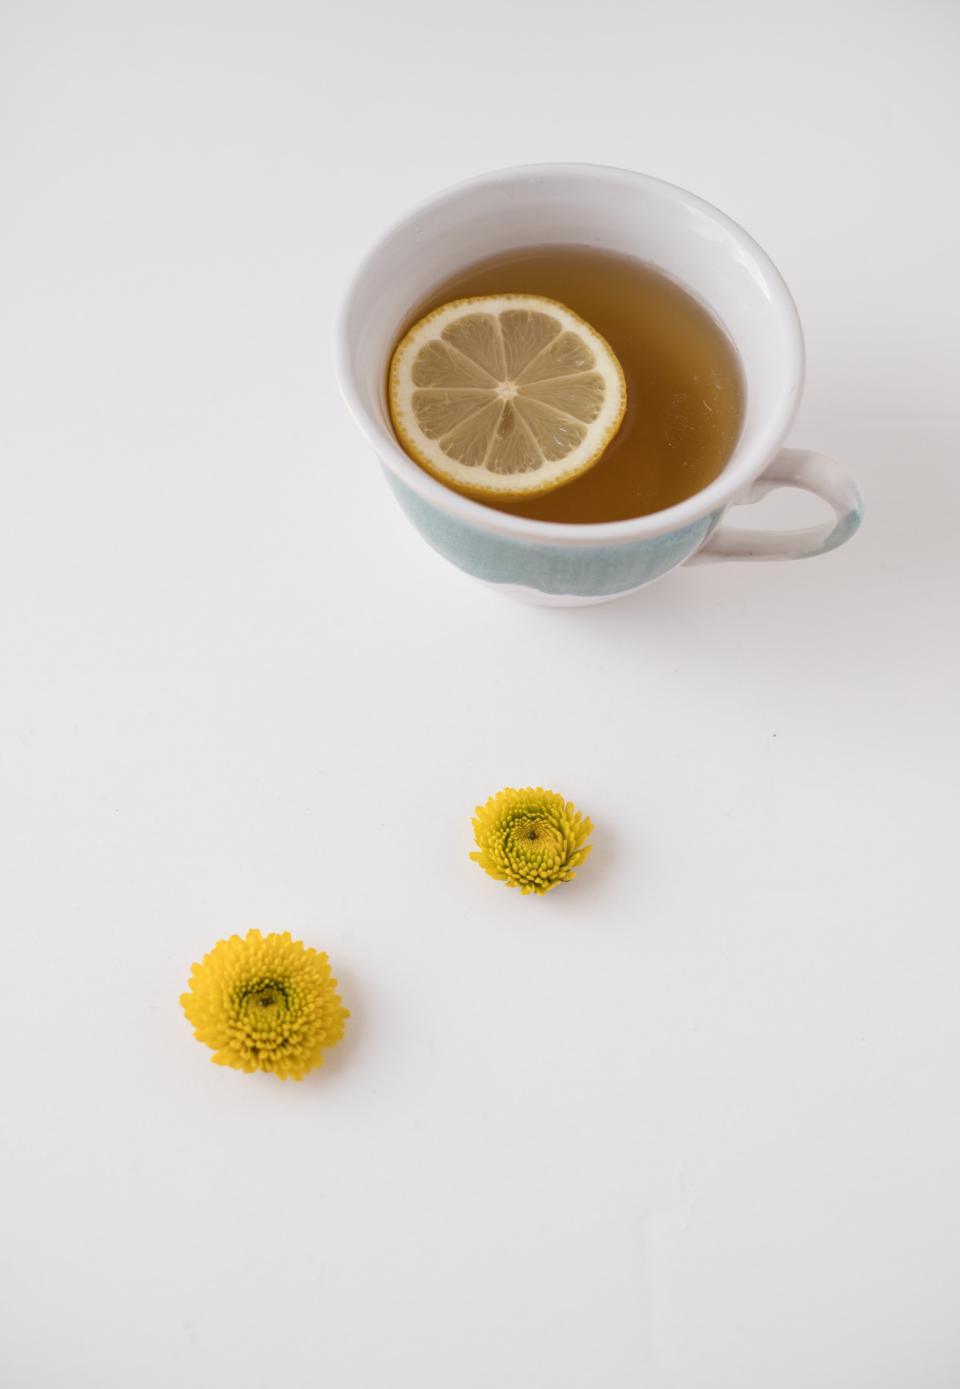 Having warm lemon water first thing in the morning encourages healthy digestion by loosening toxins in your digestive tract. It also helps to relieve symptoms of indigestion such as heartburn, burping, and bloating.